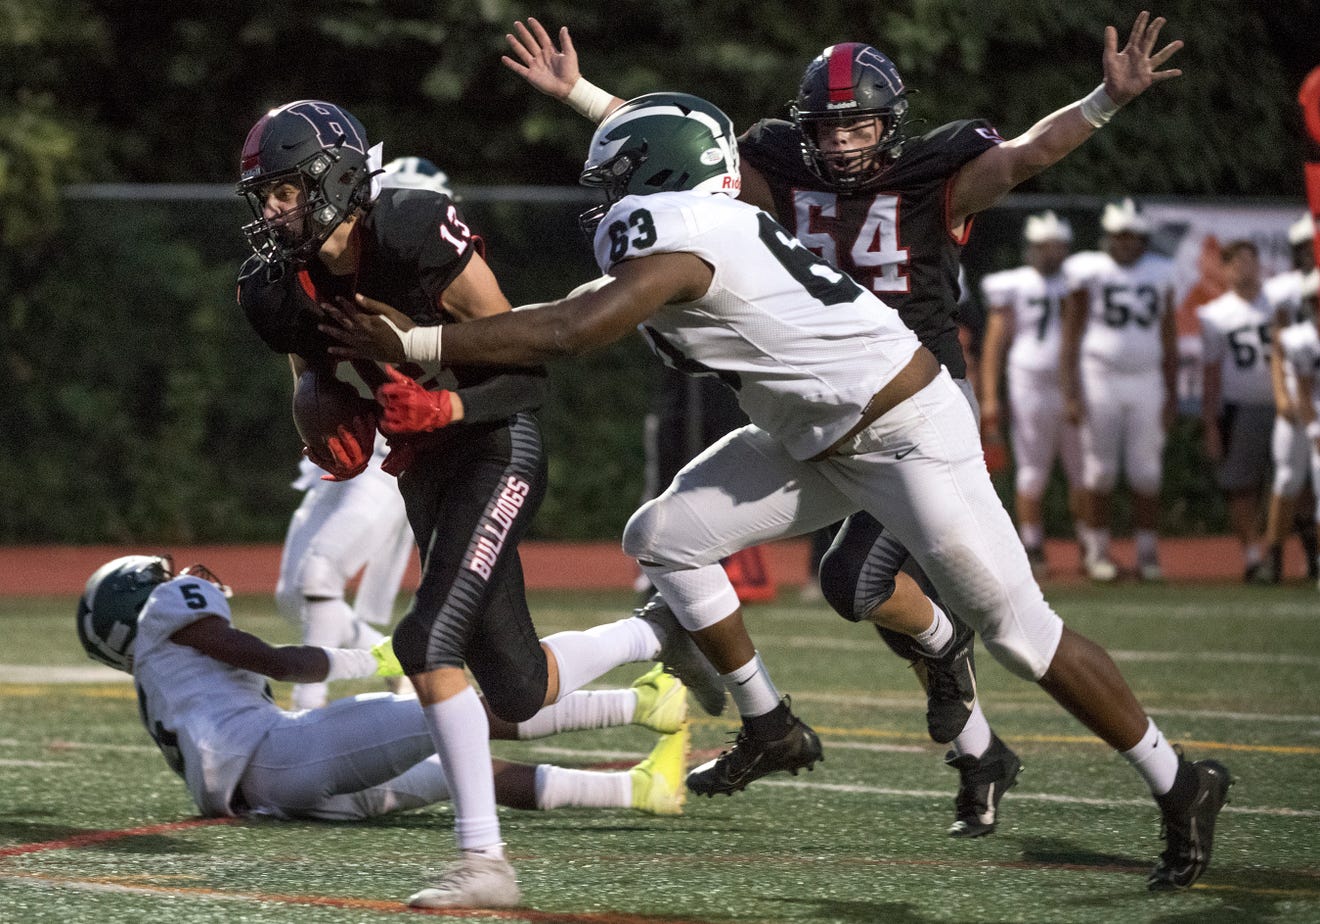 H.S. football: Haddonfield comes up big in comeback win over West Deptford